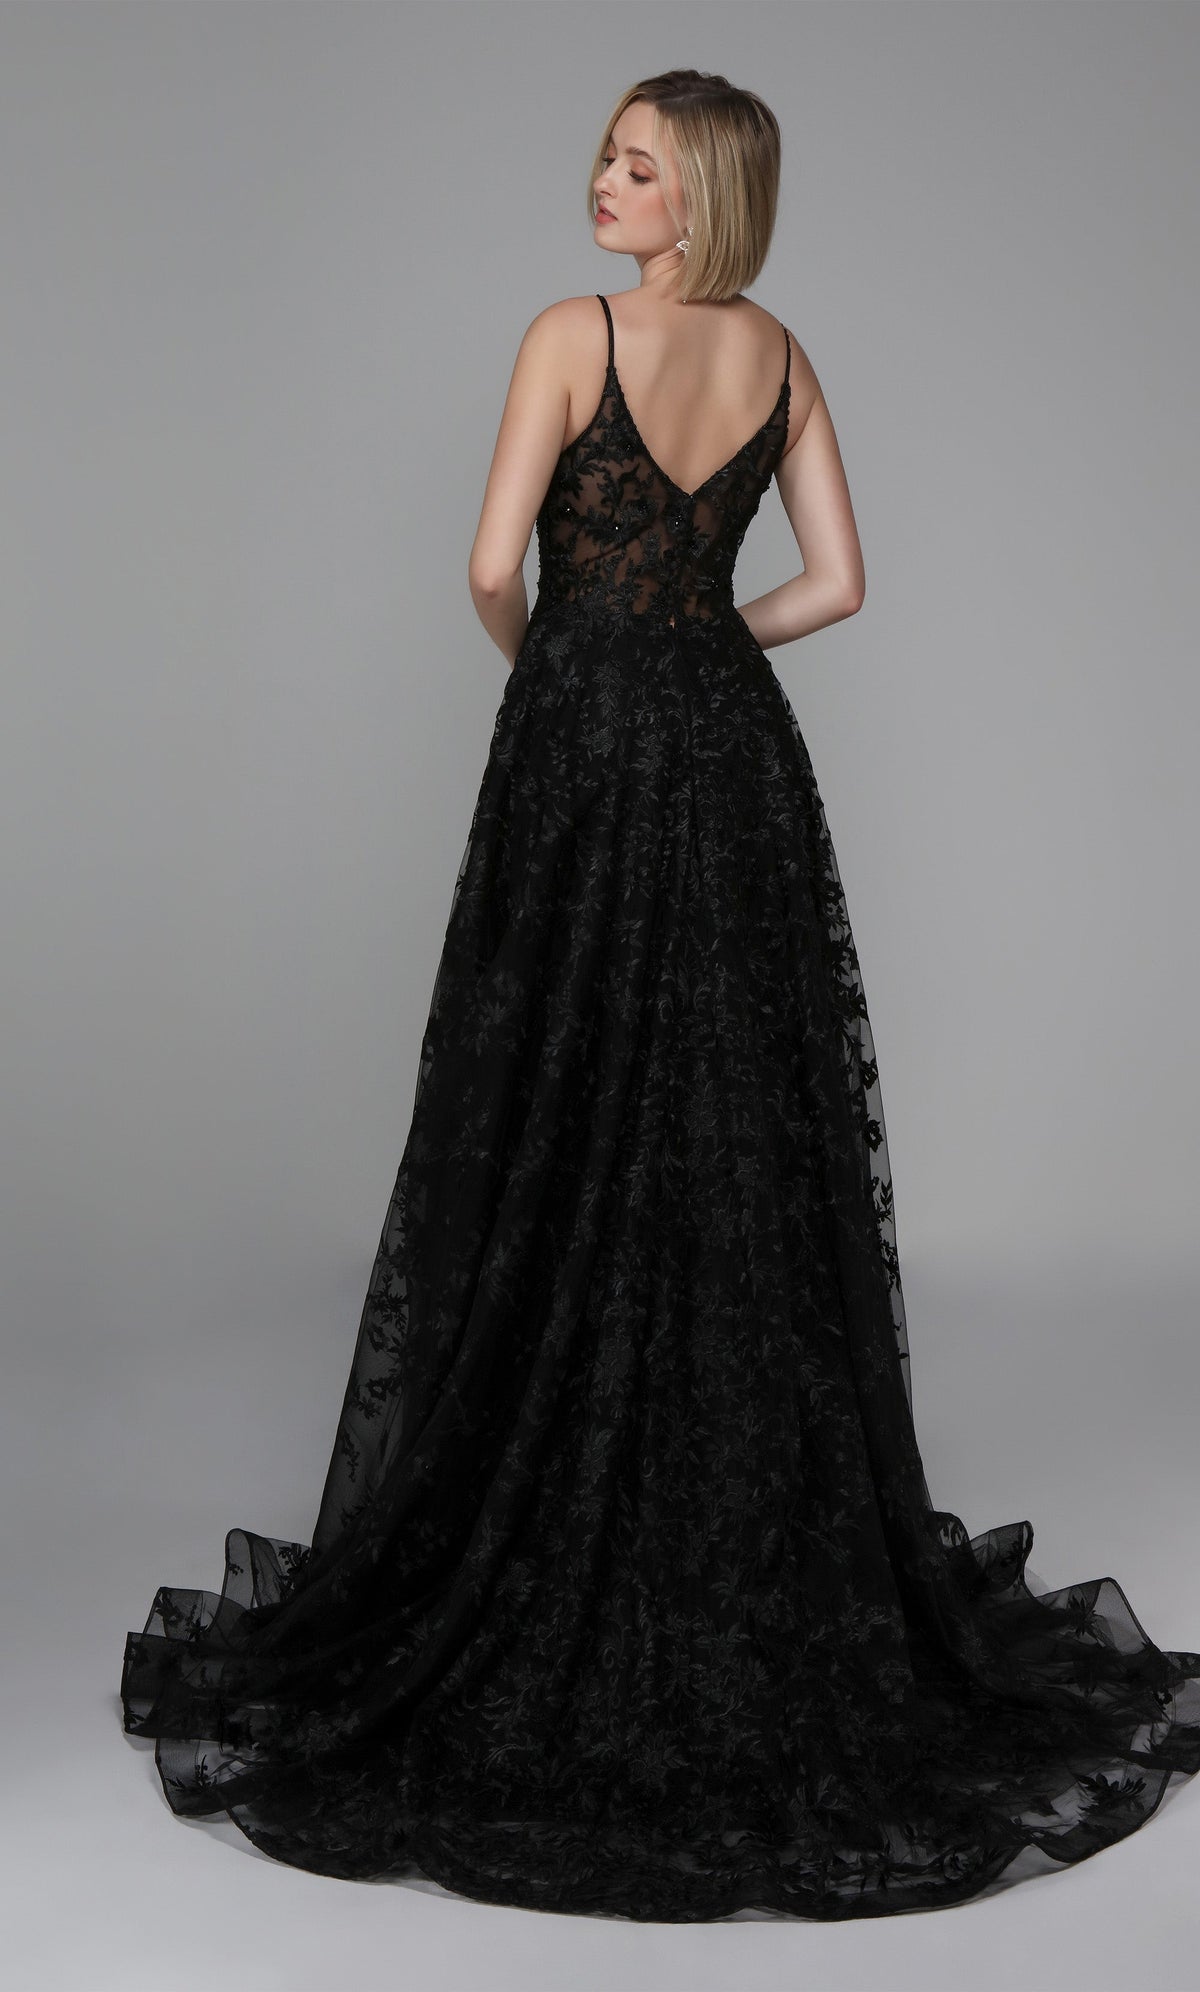 Floral lace black wedding dress with a sheer V back, satin buttons, and train.